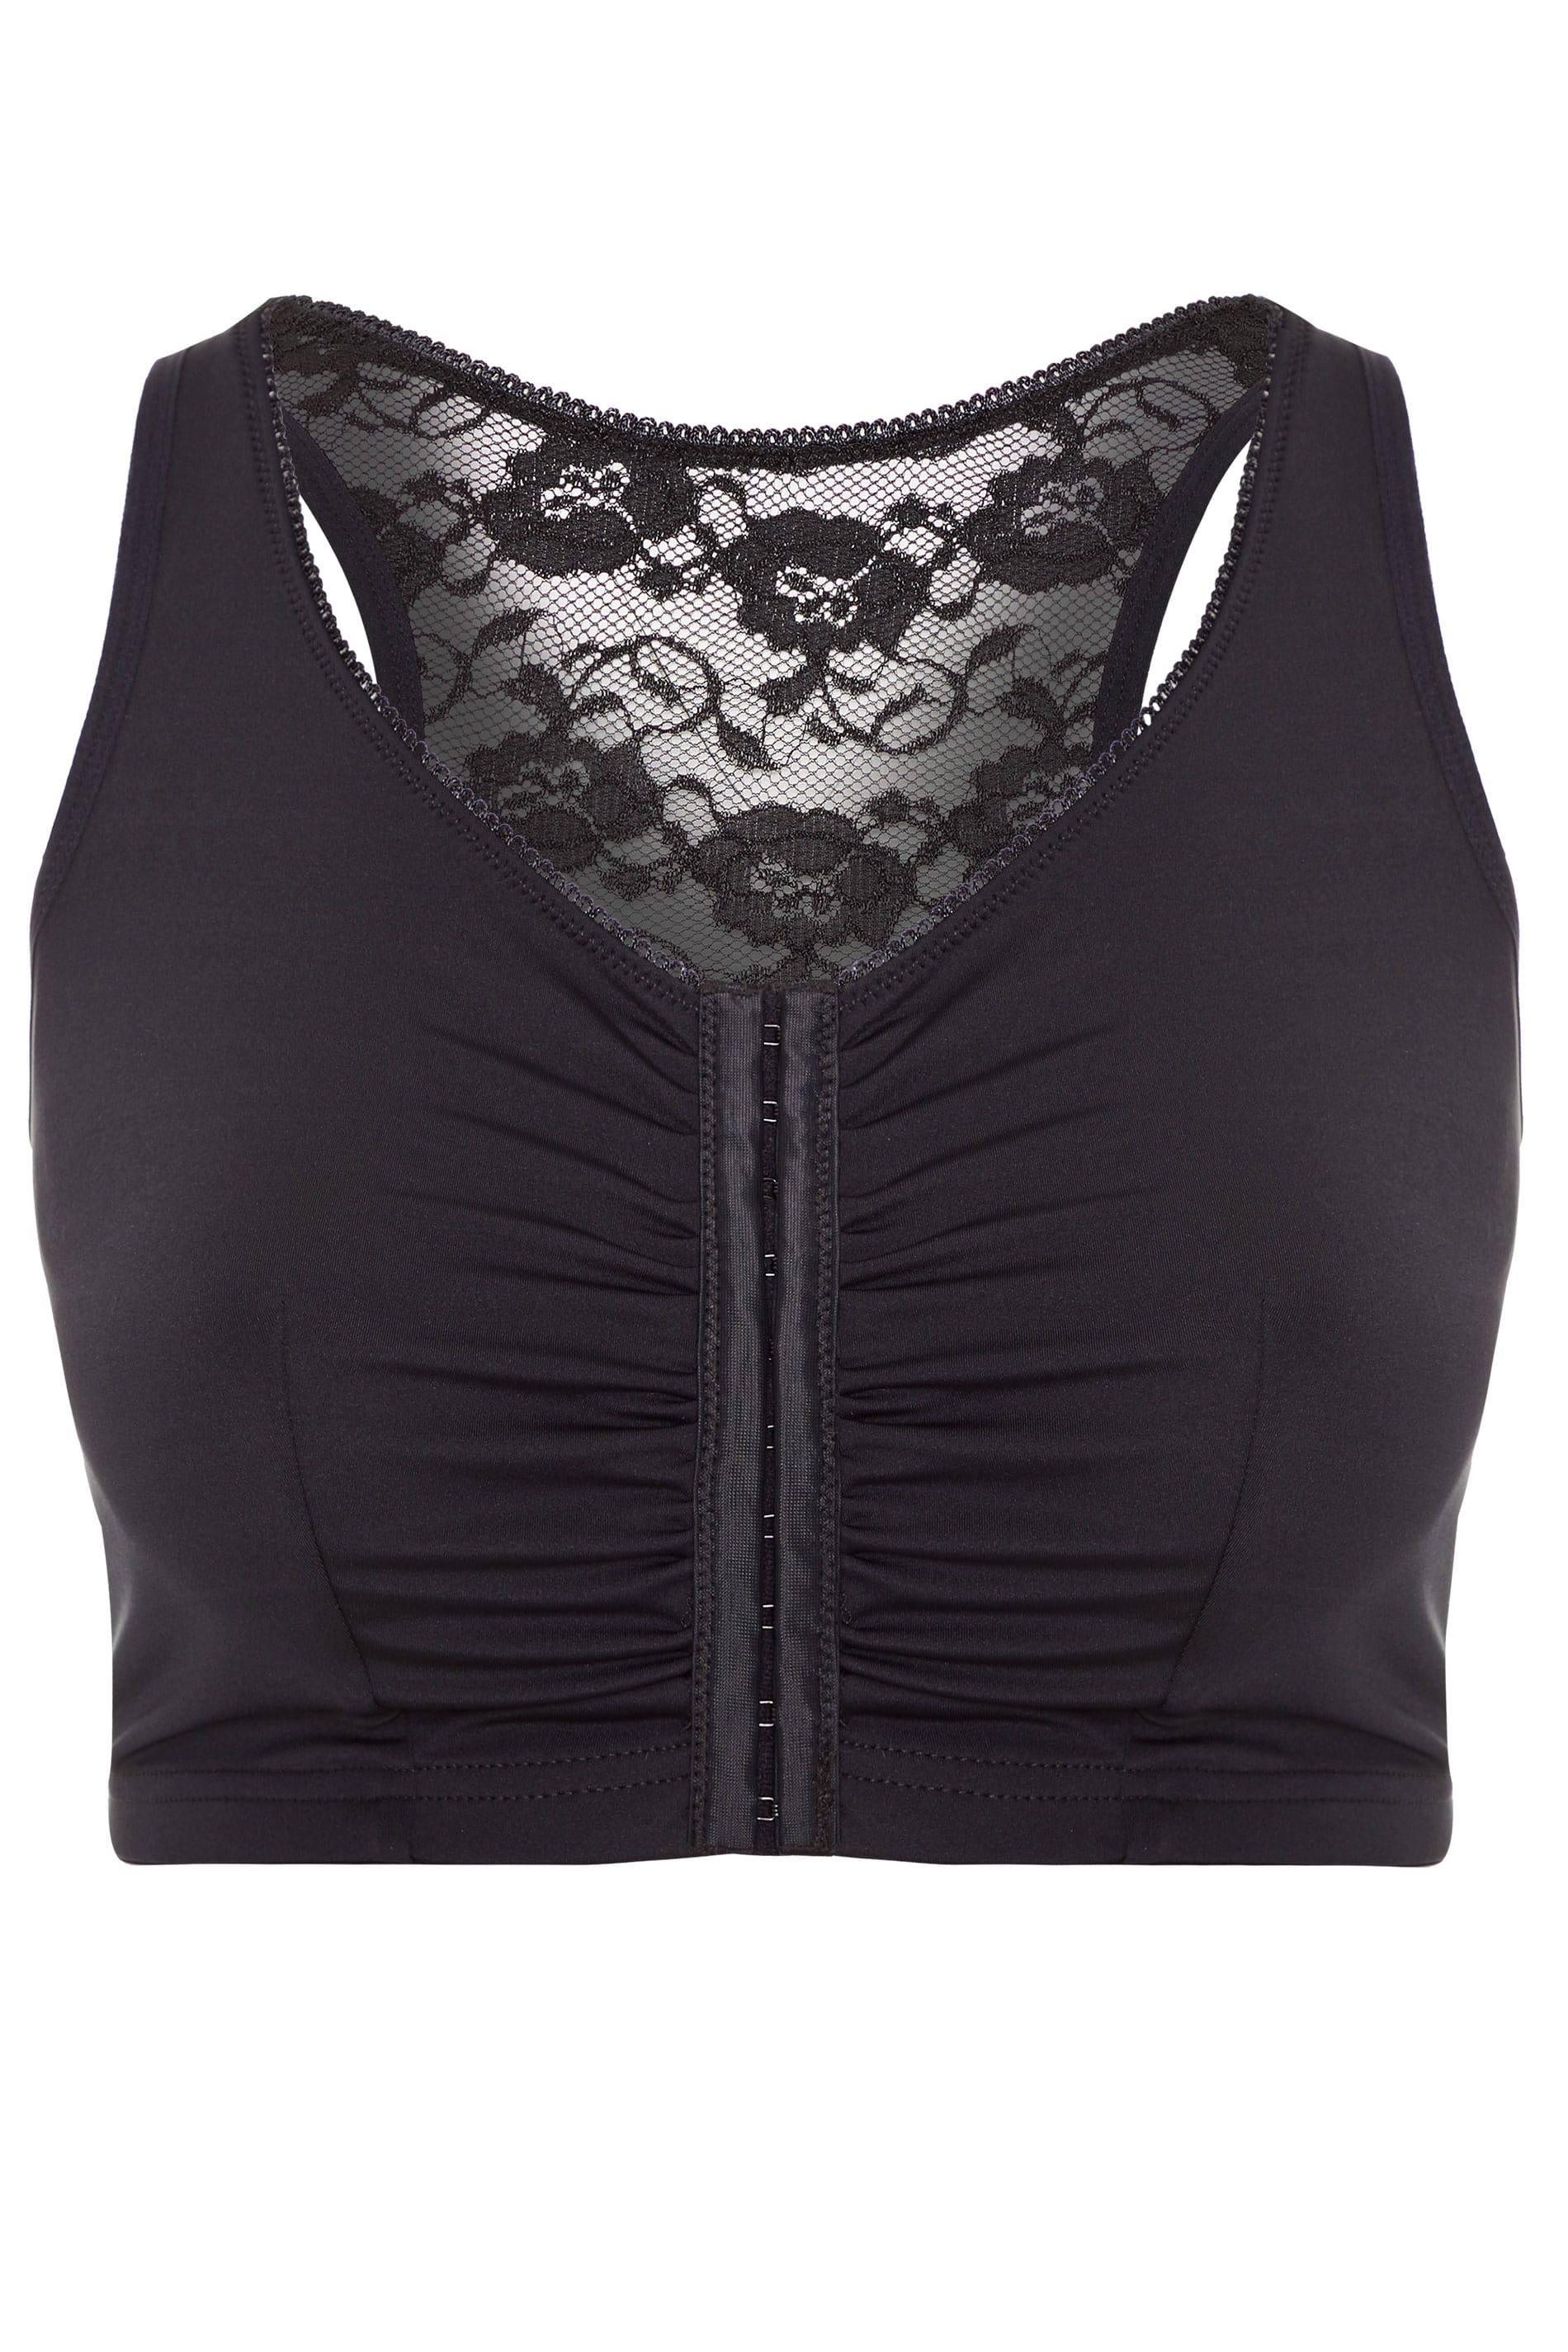 https://cdn.yoursclothing.com/Images/ProductImages/Black_Front_Fastening_Bra_146309_272b.jpg